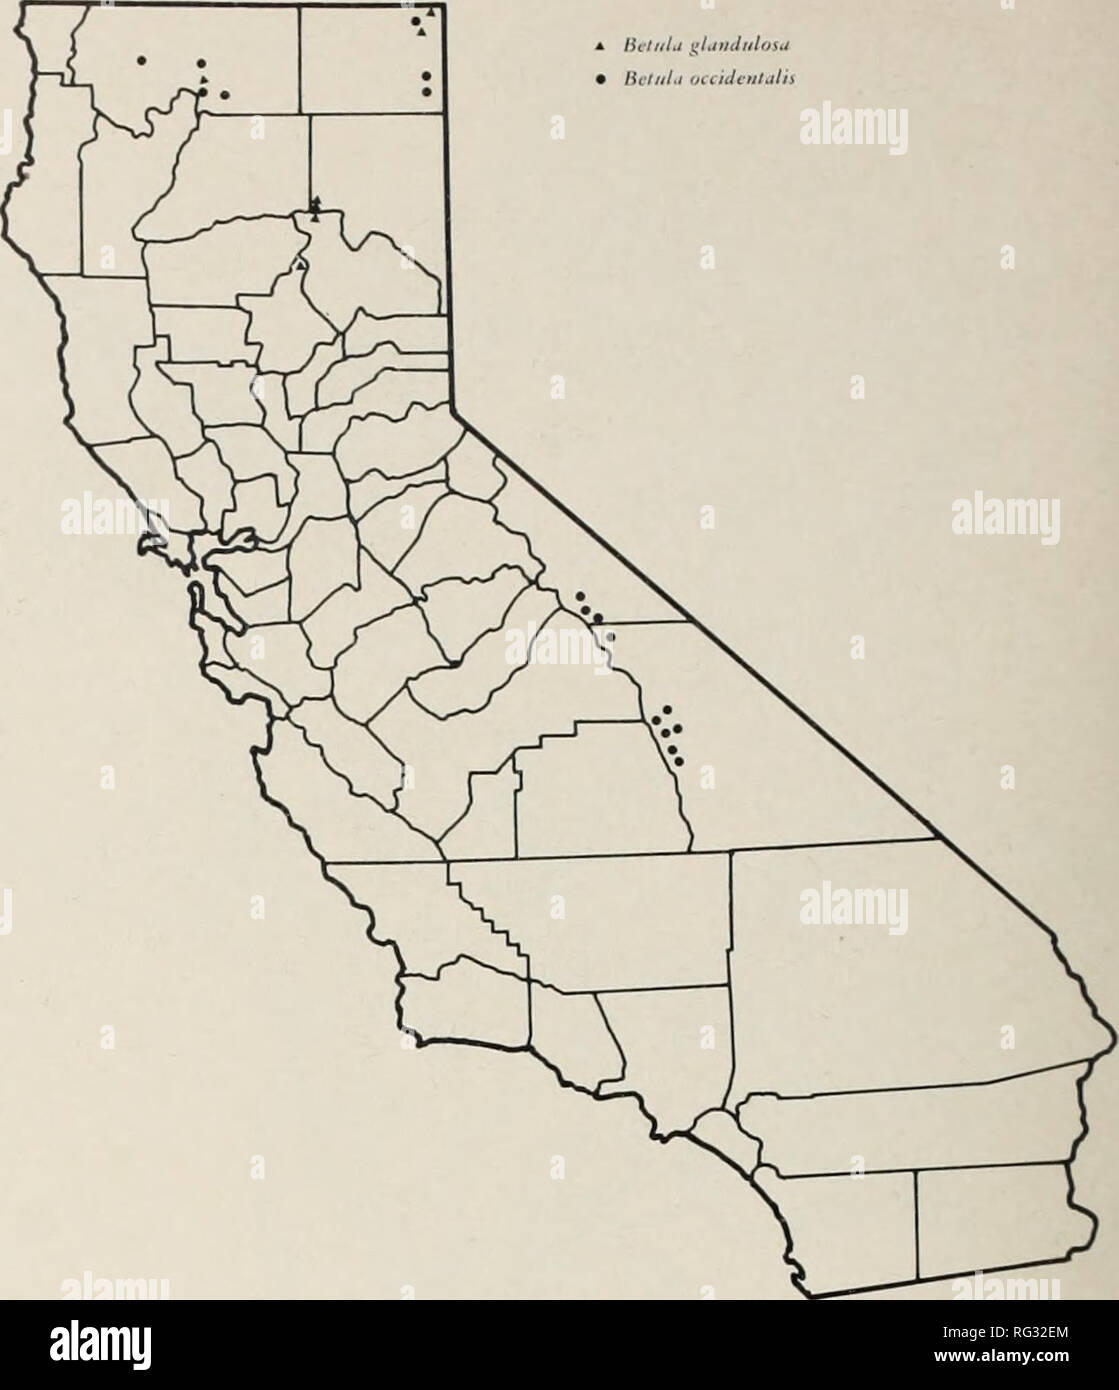 . California range brushlands and browse plants. Browse (Animal food); Brush; Forage plants. Distribution of resin birch (Betula glandulosa) and water birch {Betula occidentalis). from Tulare and Inyo counties to Fresno and Kings coun- ties, northward to Butte and Modoc counties, and west- ward to Siskiyou and Humboldt counties. It extends eastward to the Bockv Mountains and northward to Brit- ish Columbia. Economic value. Water birch is a fairly important browse species on some ranges. The leafage and twigs are cropped with moderate to good relish by all brows- ing animals, but it is sometime Stock Photo